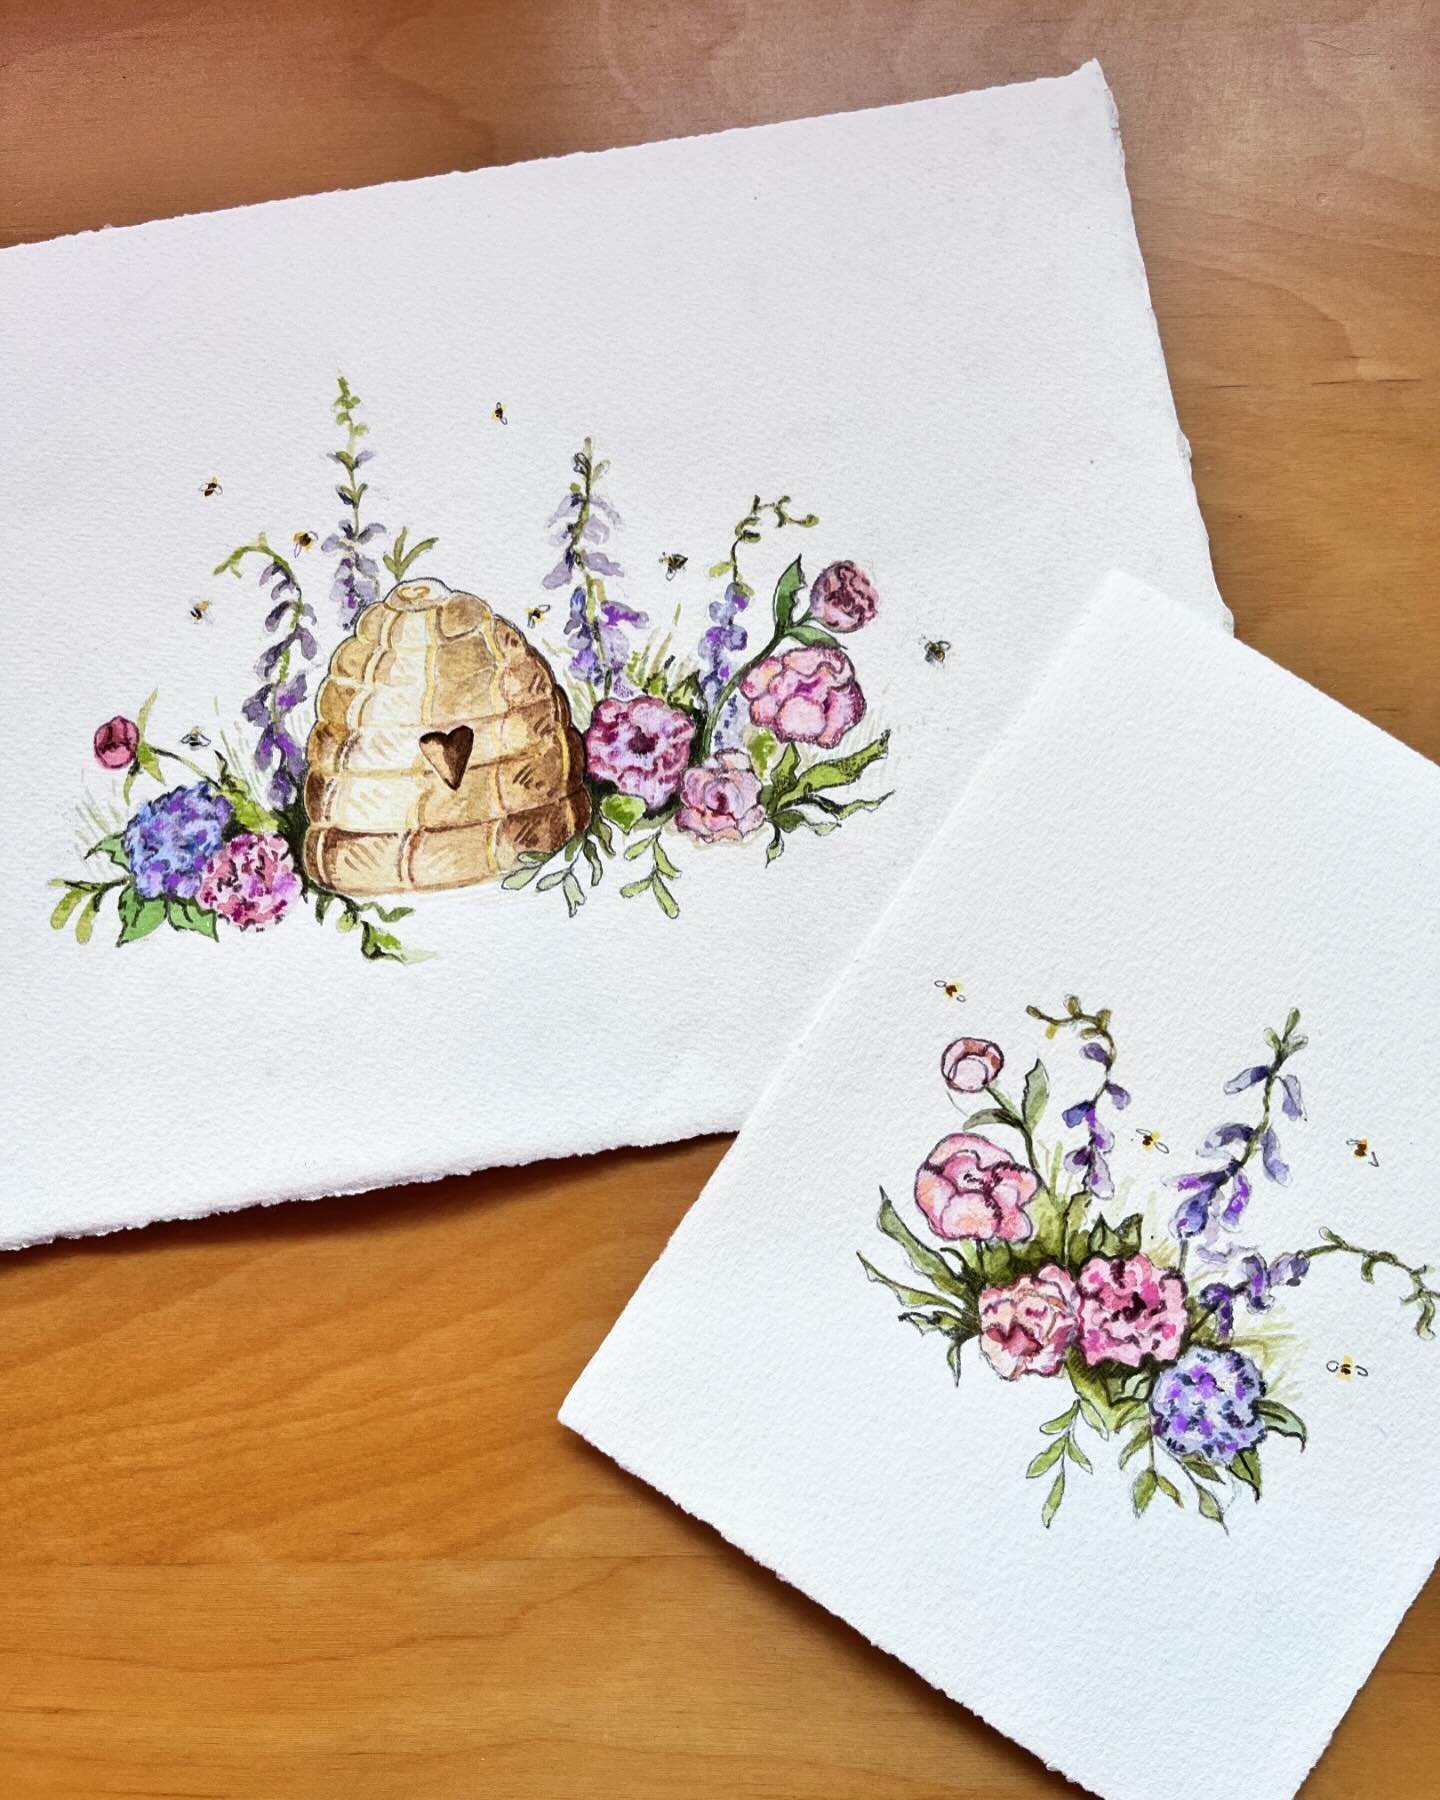 Working on a lovely commission at the moment, so looking forward to stitching 🧵 🌸🌼🐝